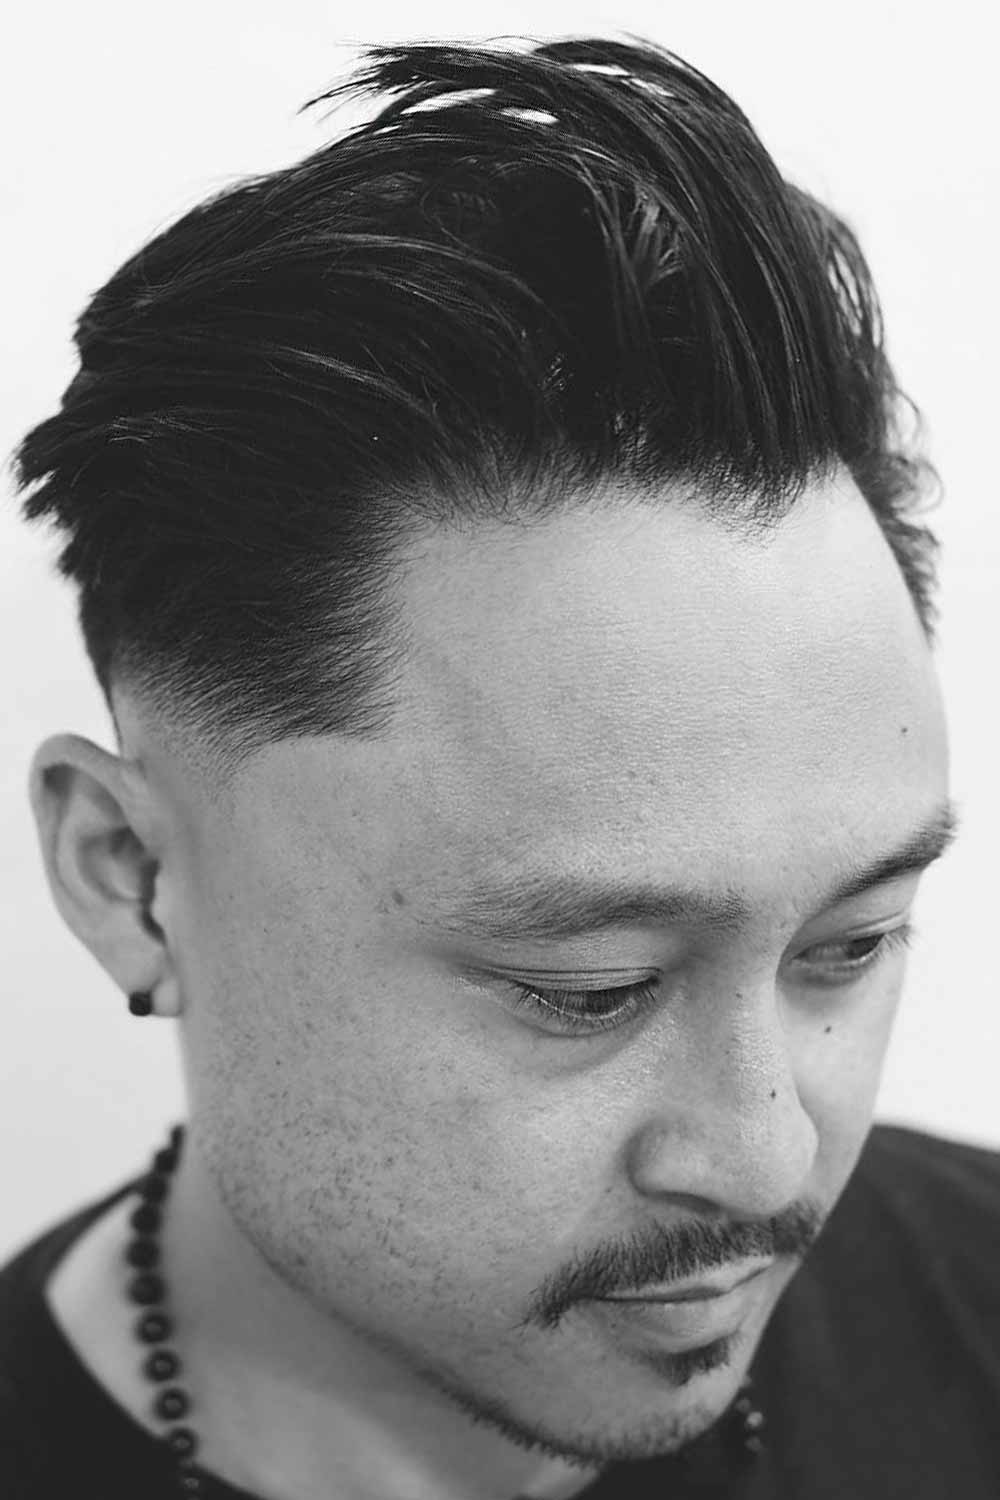 Brushed Back Haircut #asianhairstylesmen #asianhairstyles #asianhaircut #asianmen